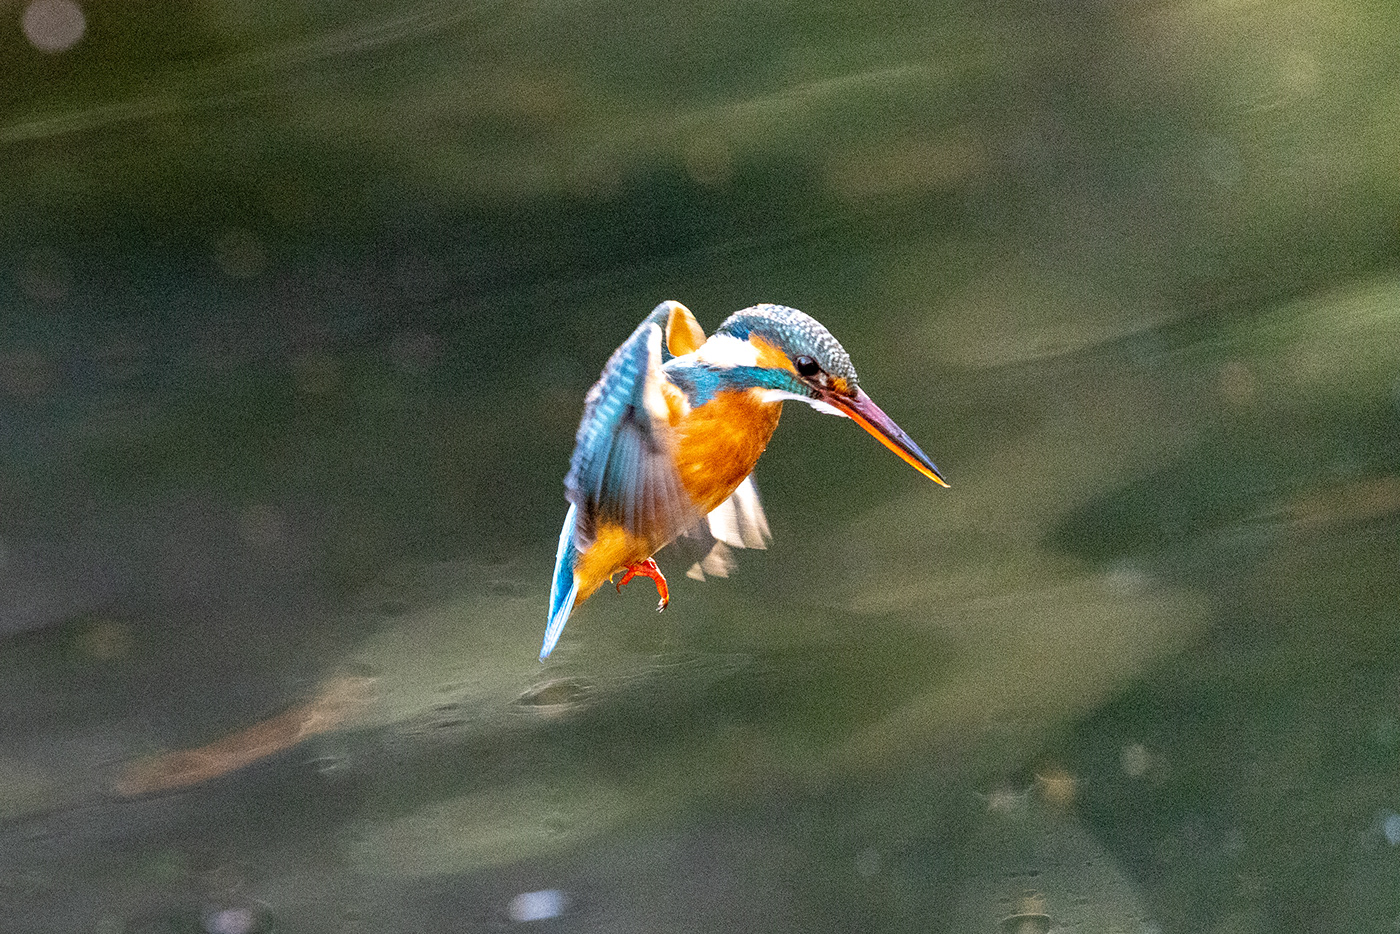 Blue Jewel Hovering kingfisher